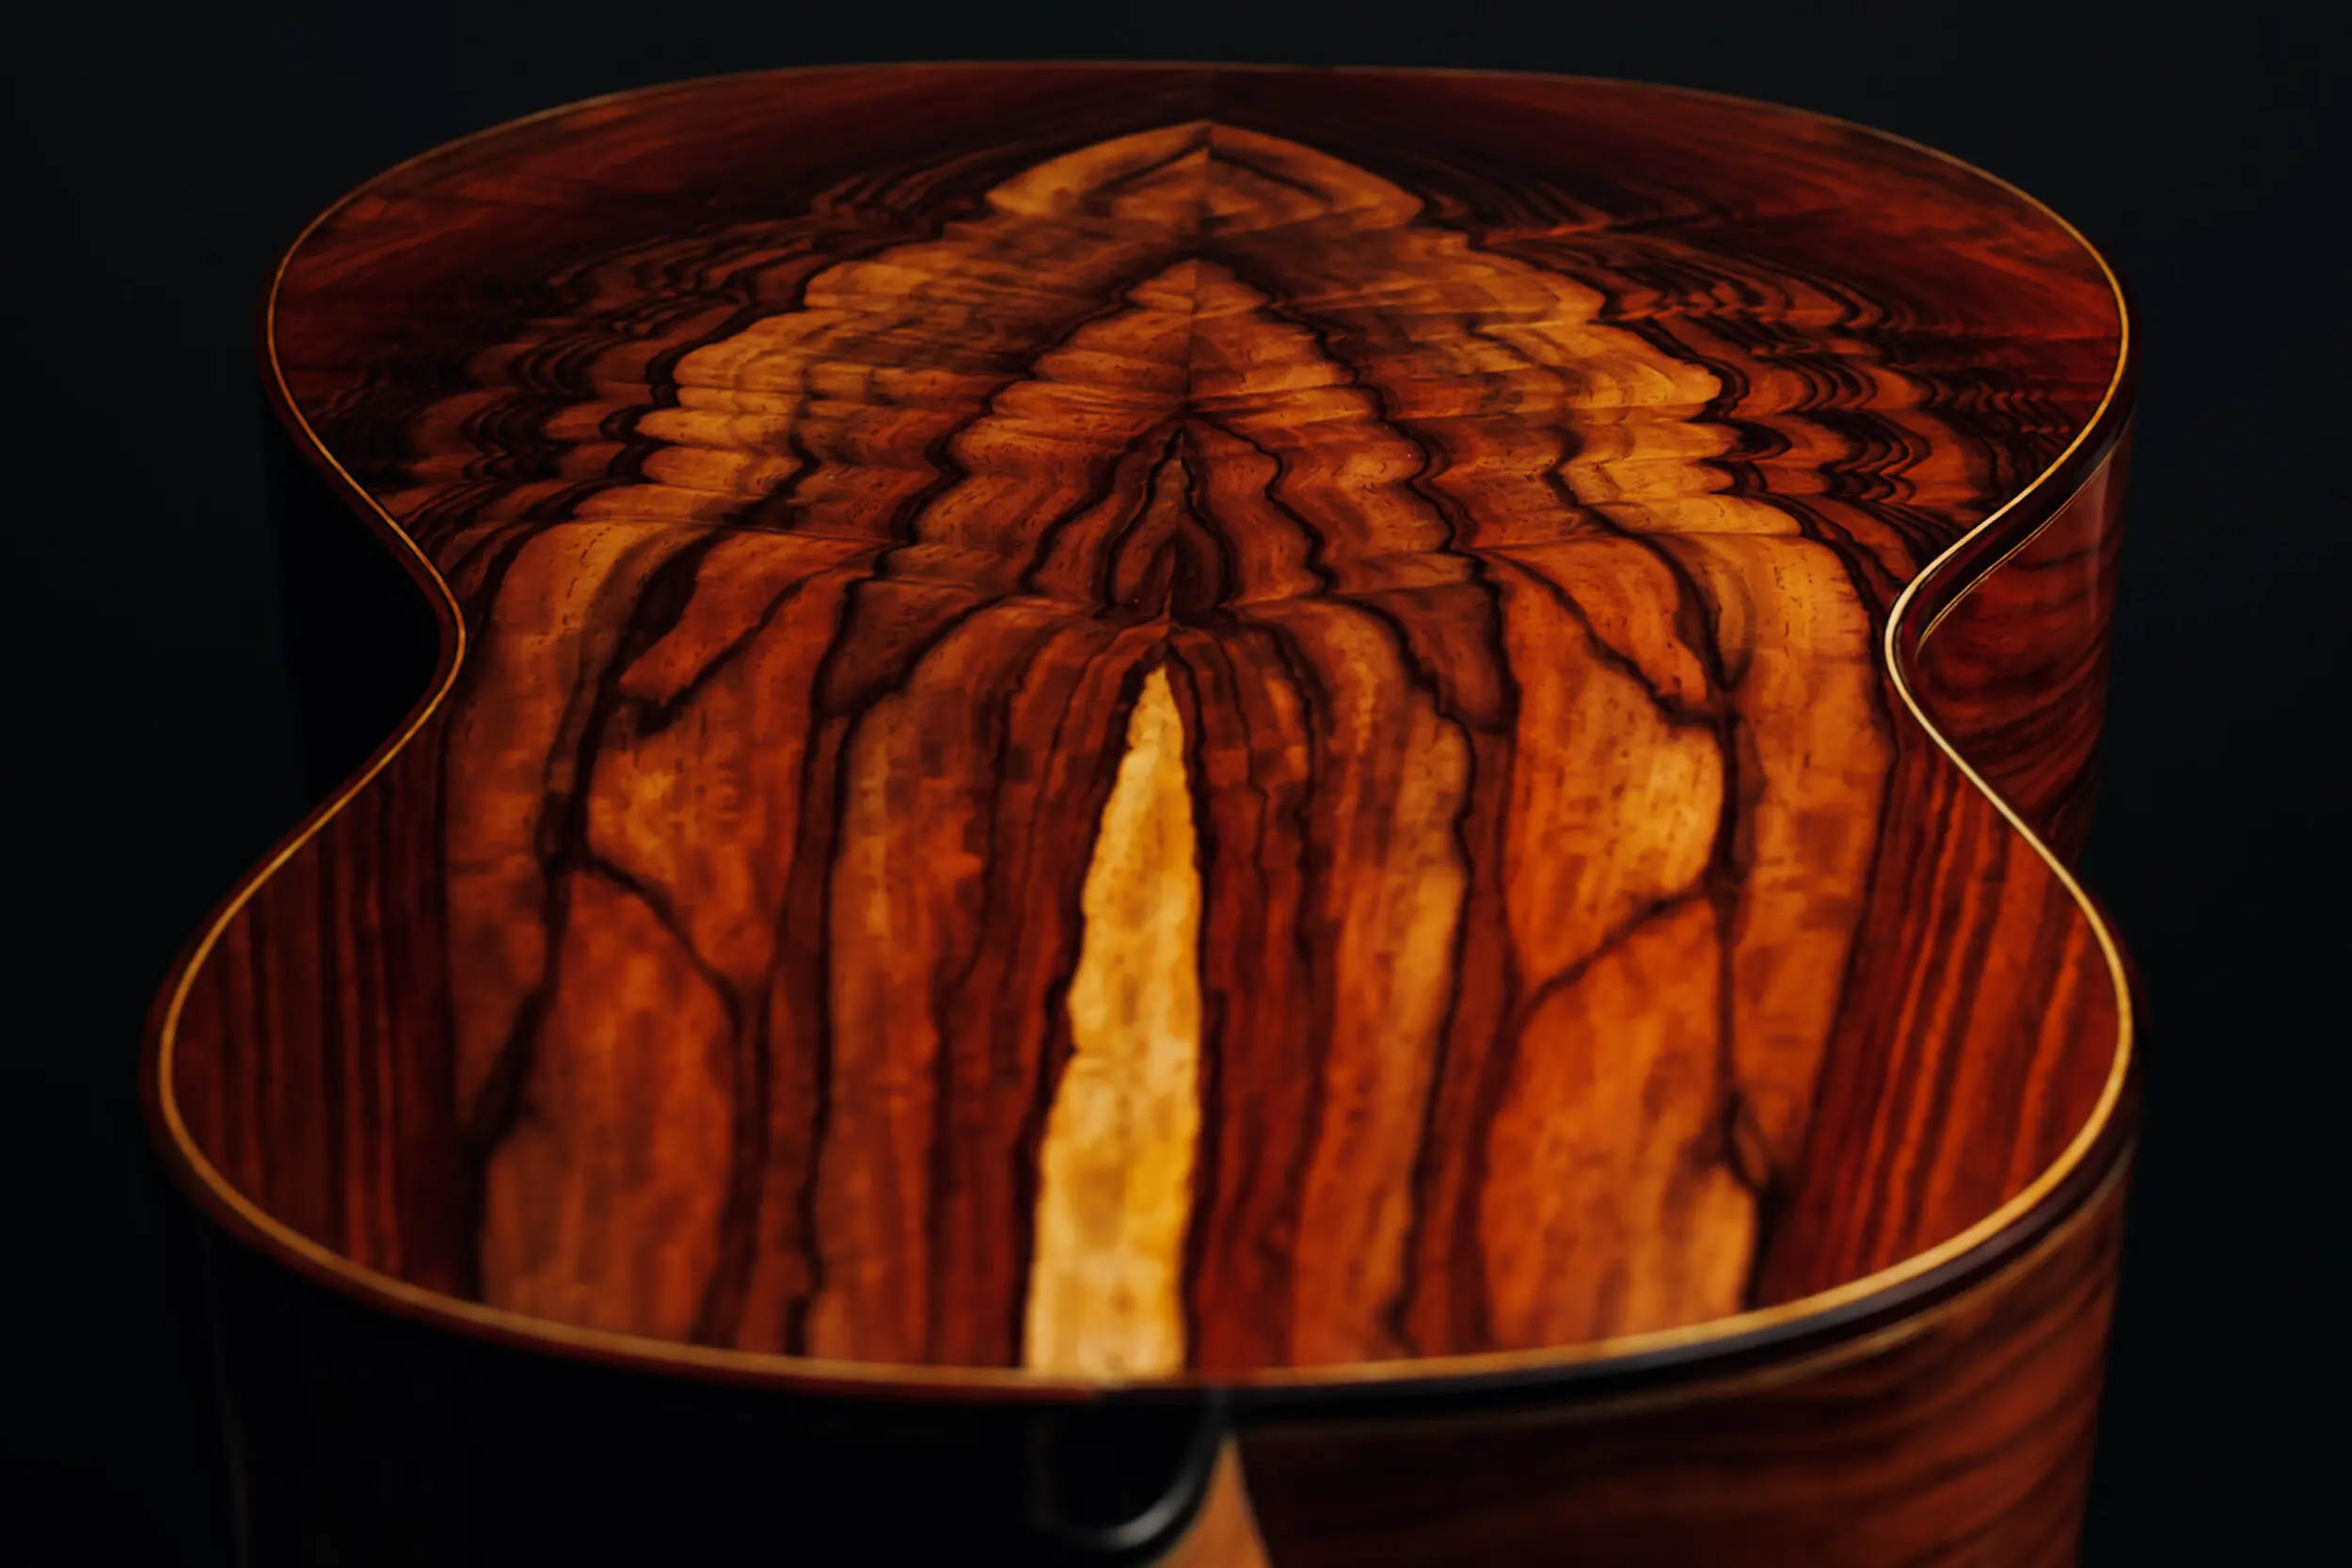 Named Erythroxylon mexicanum in scientific circles, Cocobolo is a member of the Dalbergia family. Renowned for its density and natural oils, this wood is frequently used in xylophone, guitar, and bass manufacturing due to its capability to produce a balanced tone.